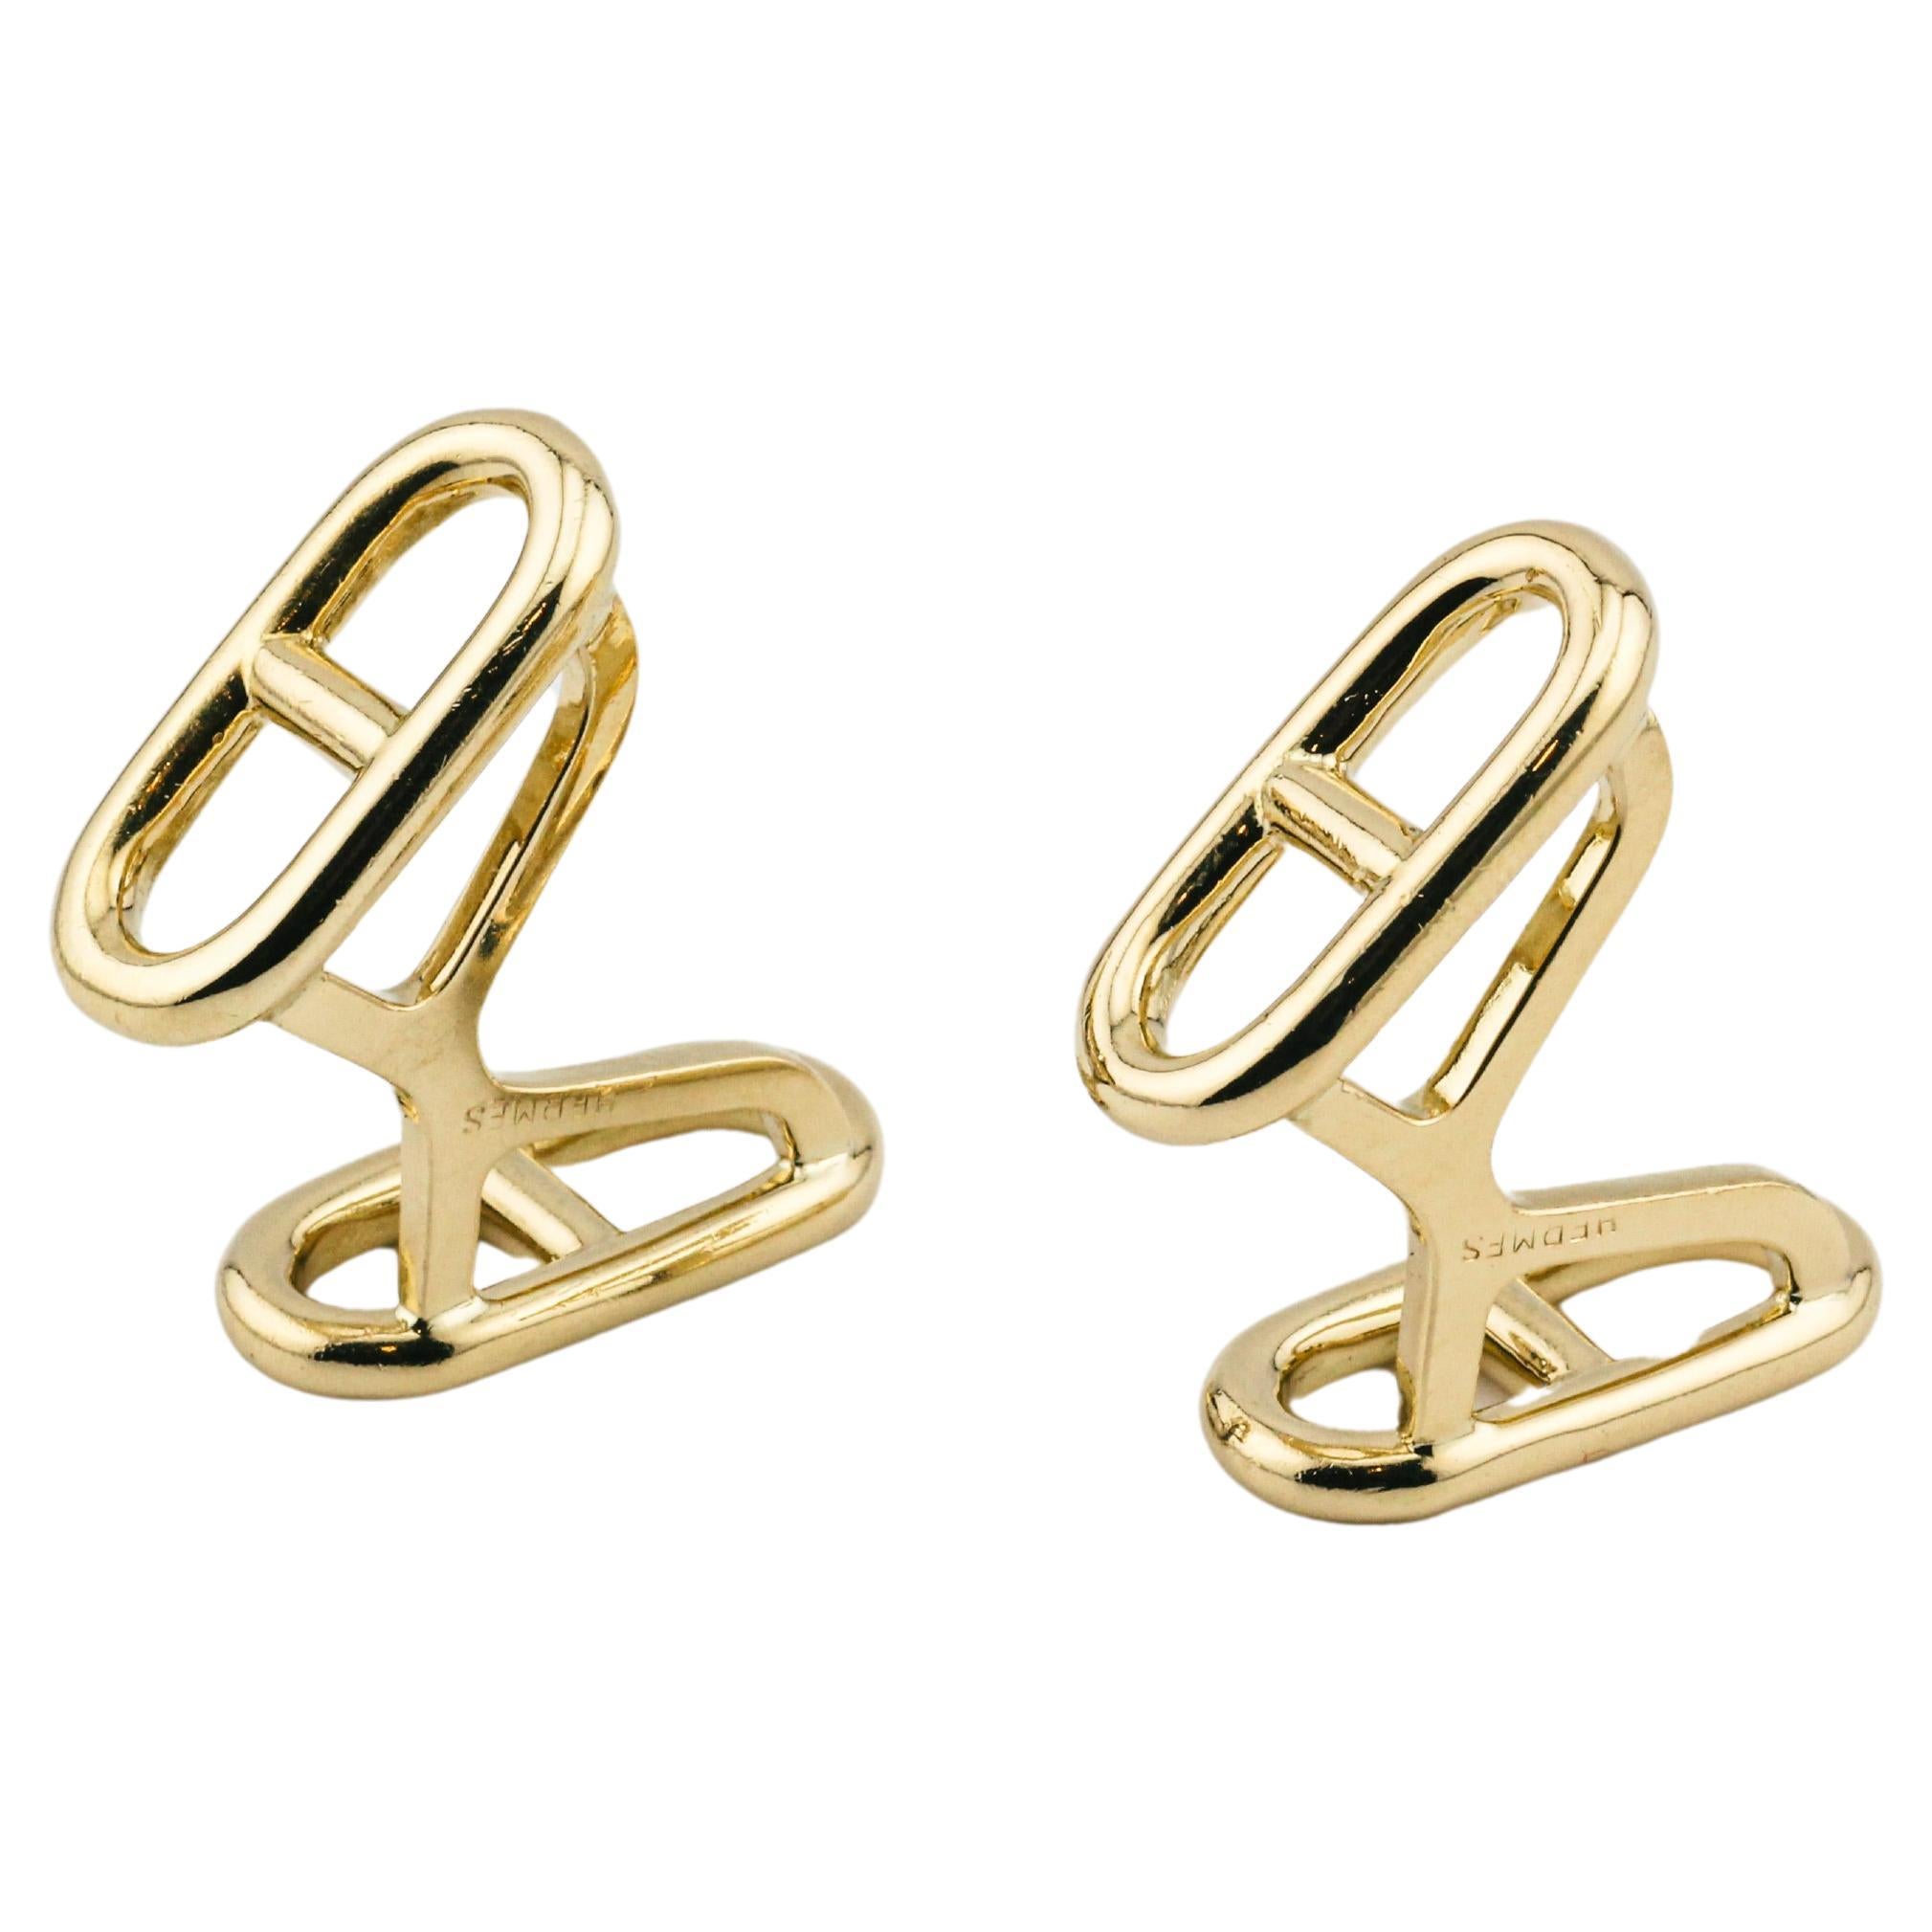 Hermes Vintage 1970s Chaine D'Ancre 18k Gold Cufflinks